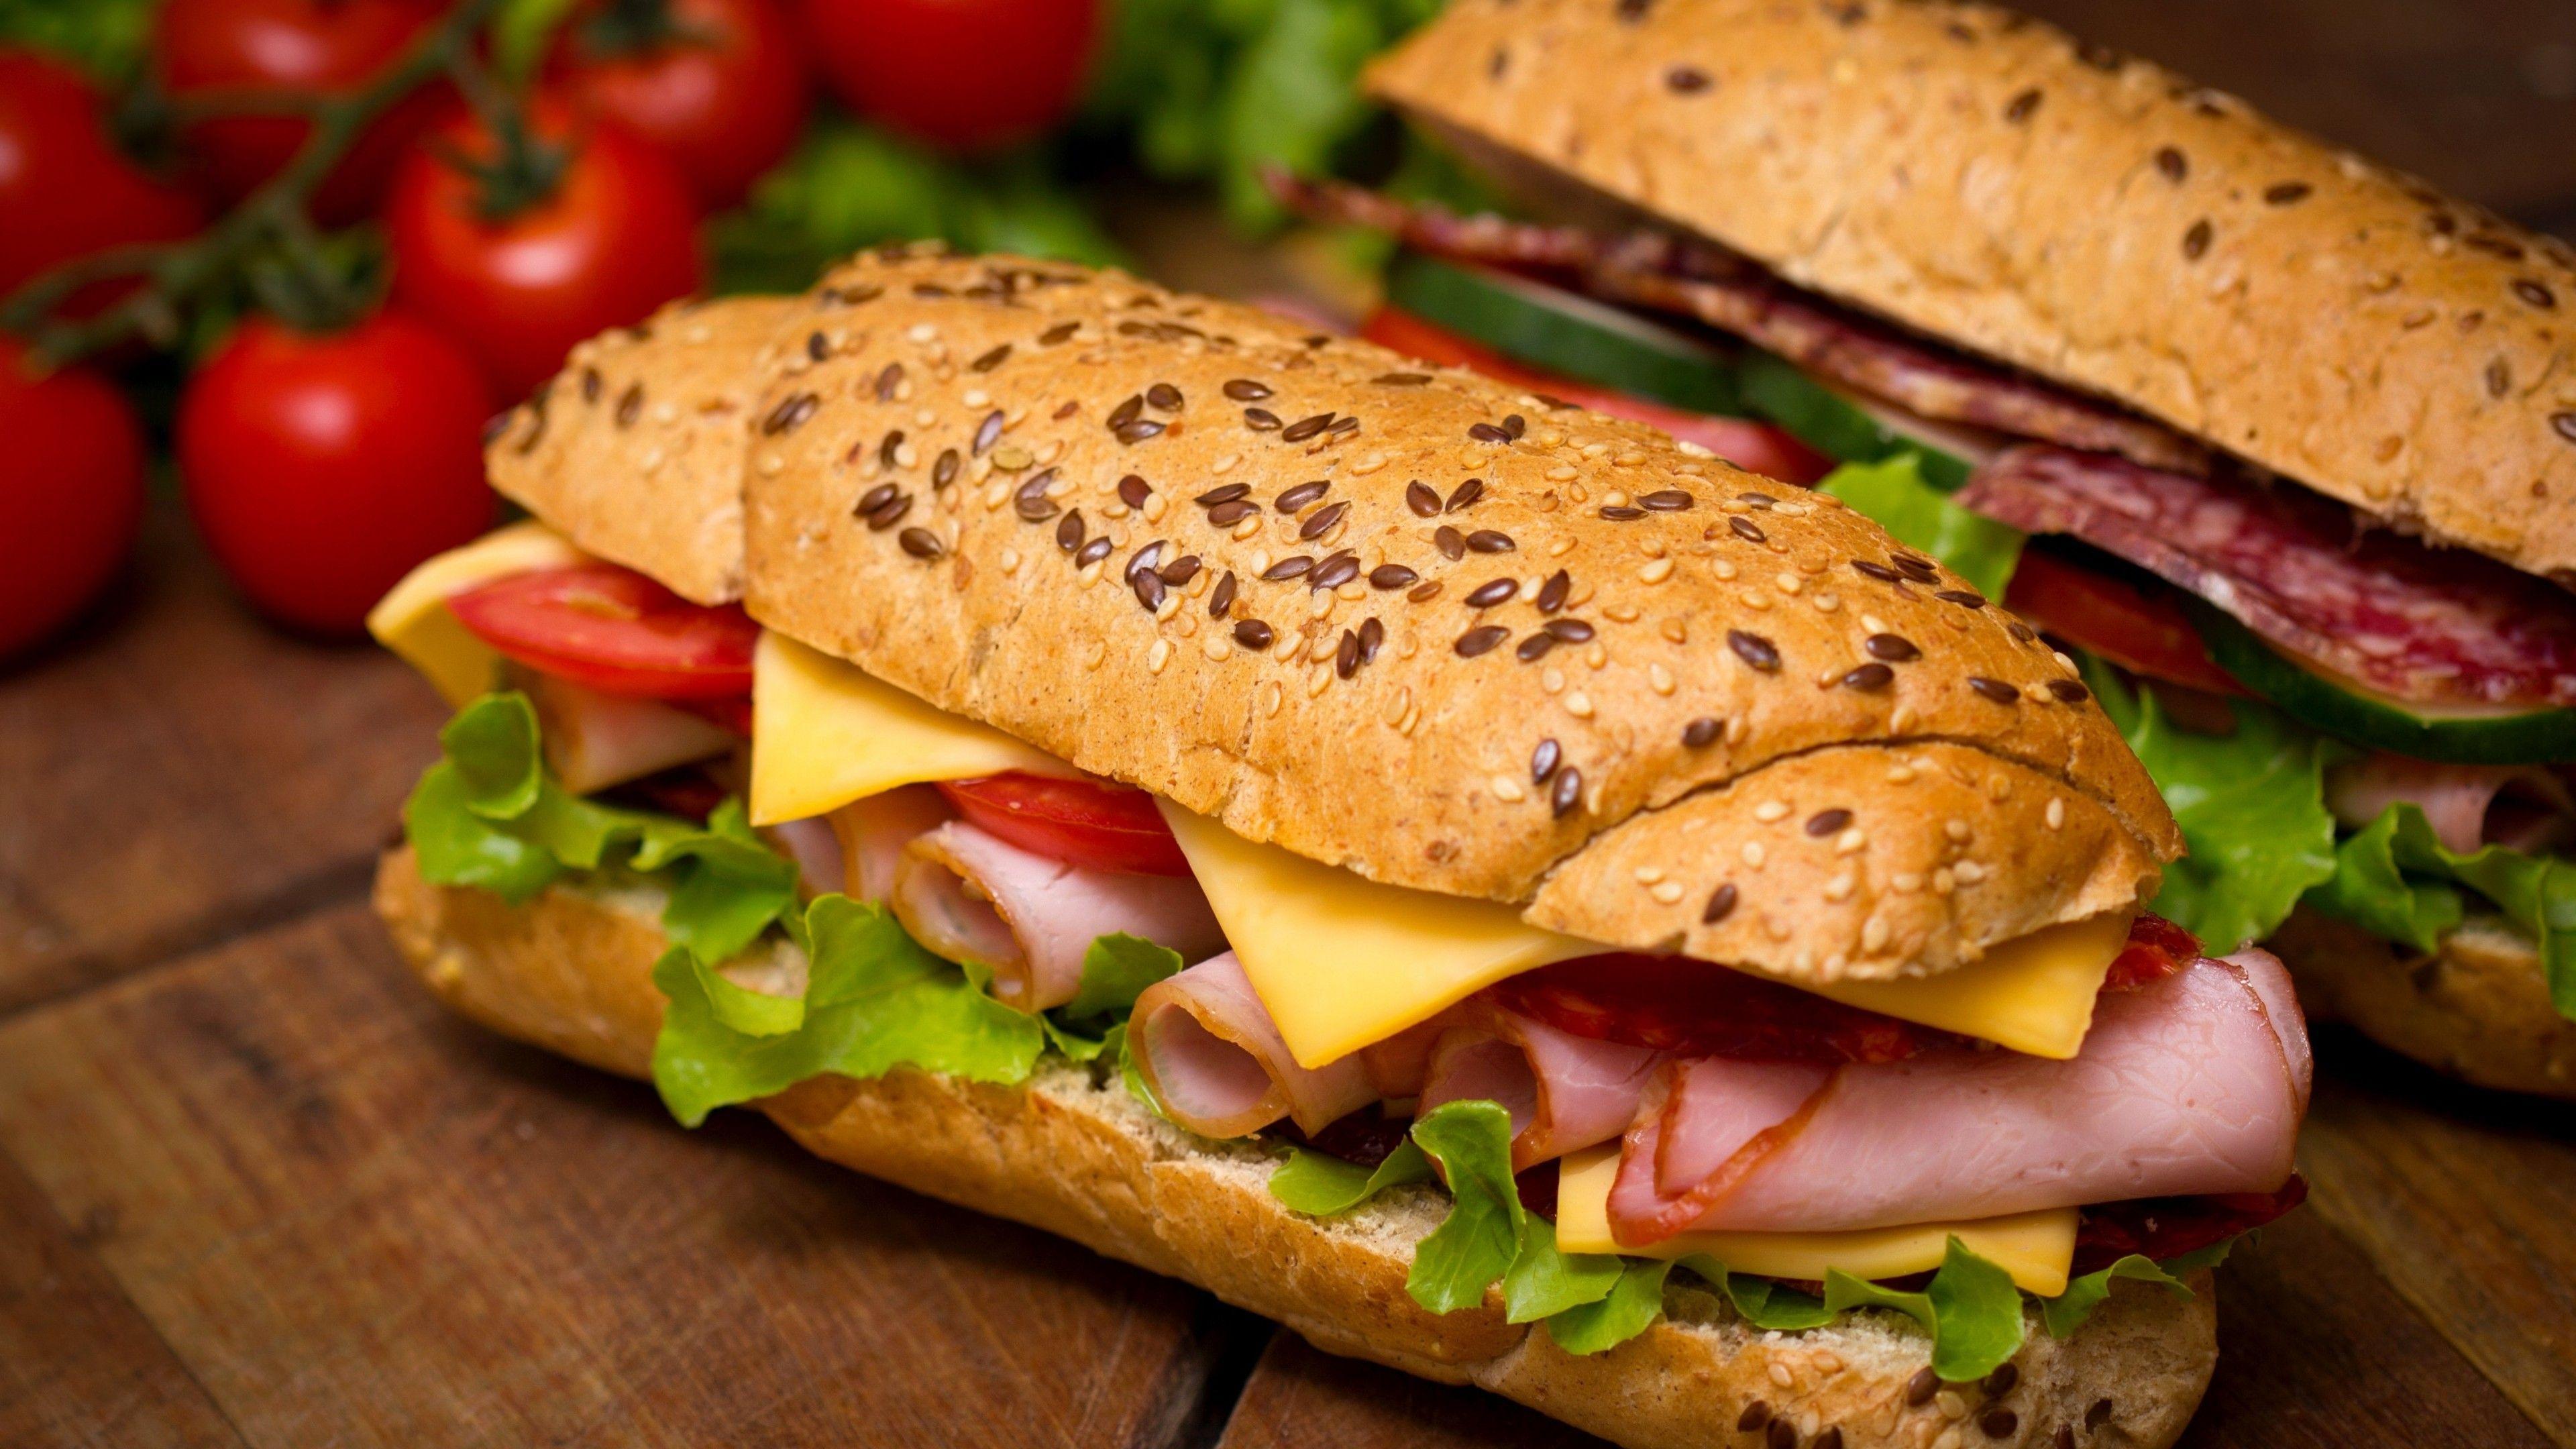 Download 3840x2160 Sandwich, Cheese, Vegetables, Meat, Bread